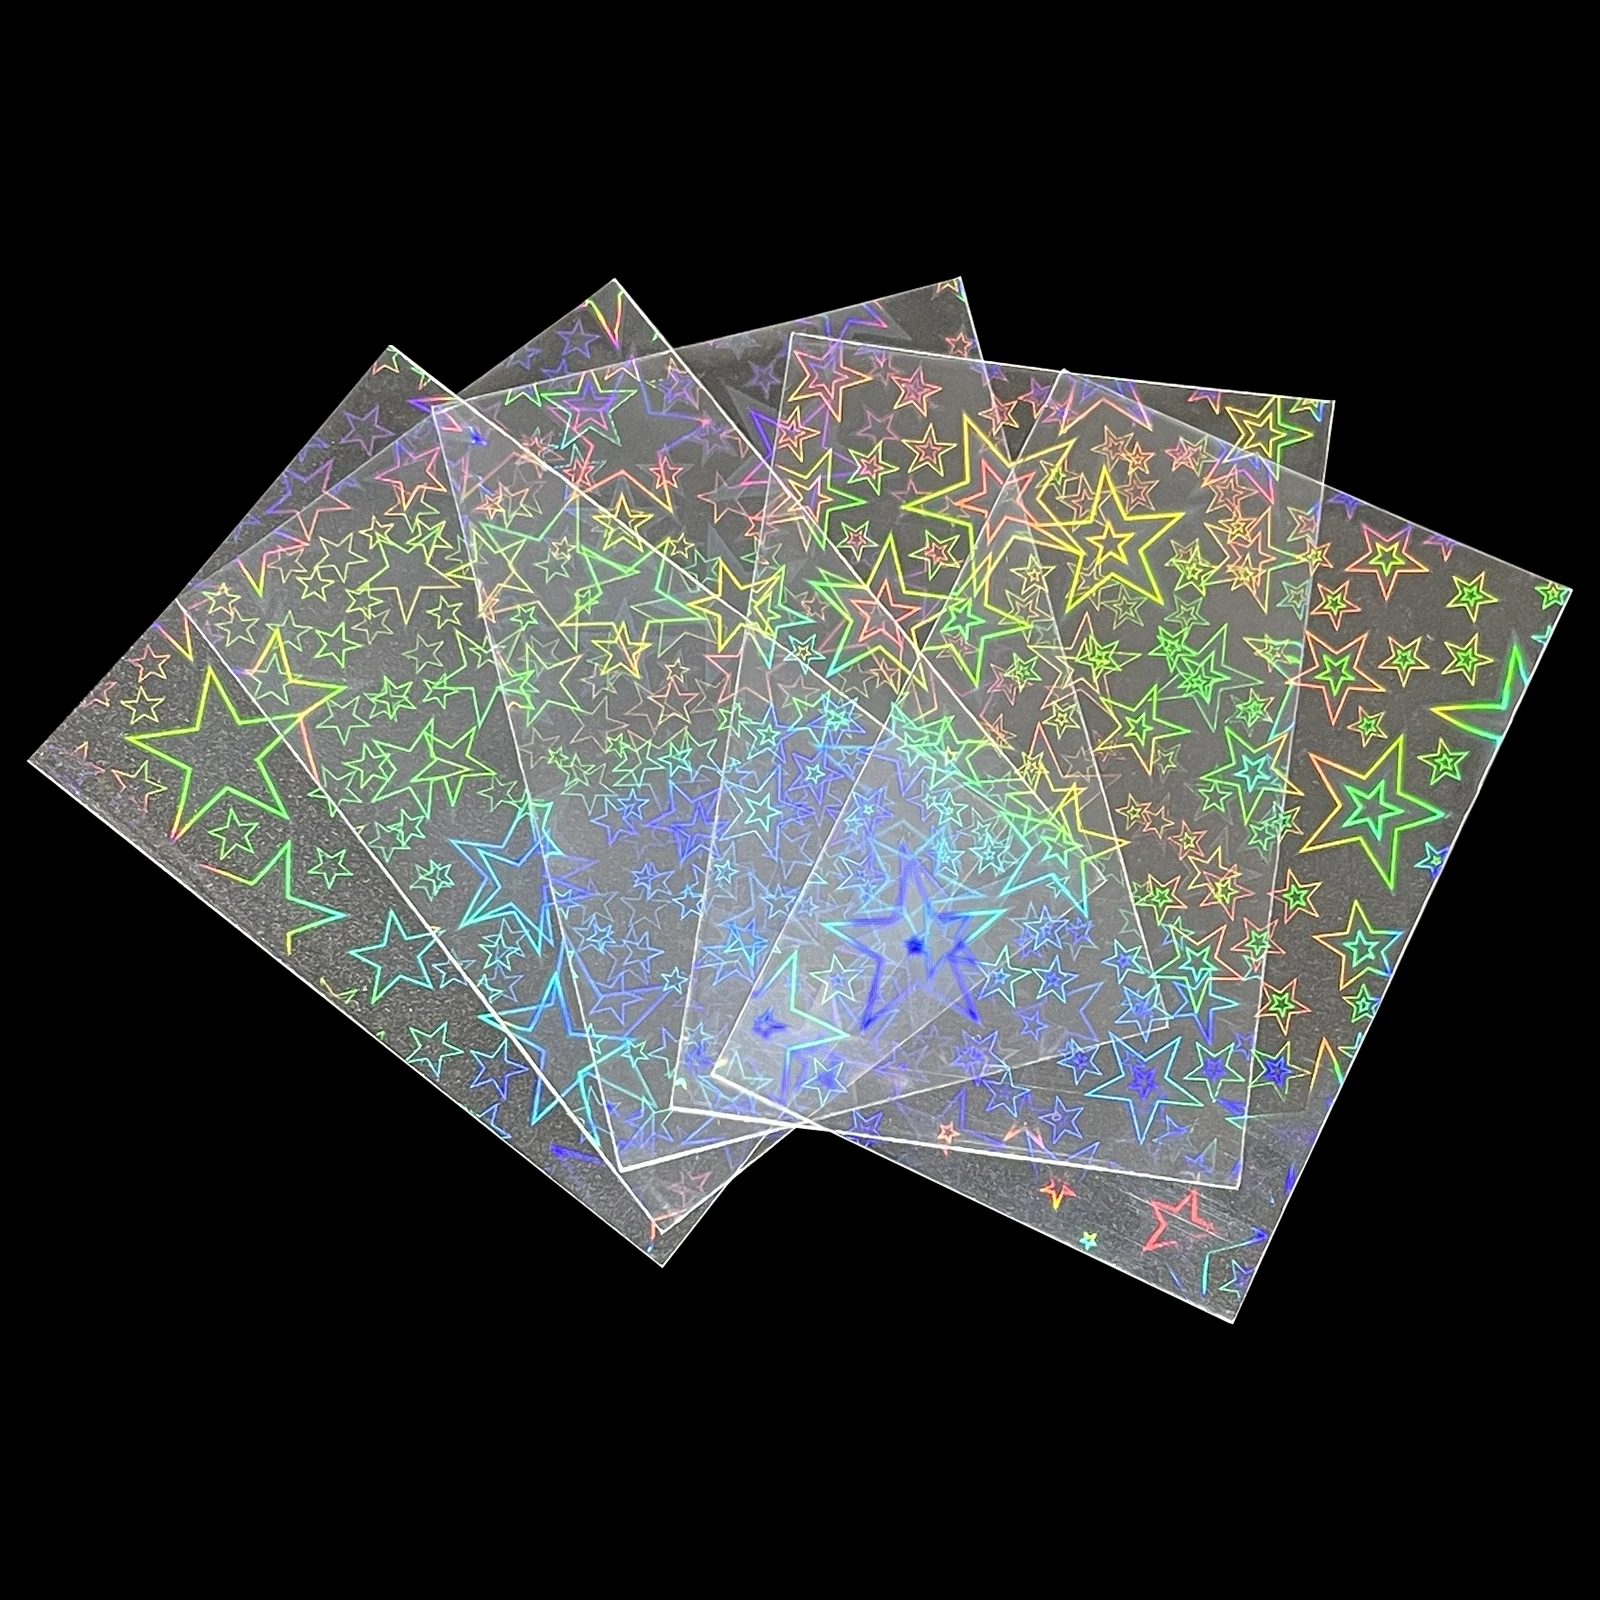 50PcsBig Star Laser Flashing Card Sleeves Holographic Film Idol Photo Card Games Magic Card Sleeve Trading Card Protective Cover 20pcs pack kpop card sleeves glittery star kpop toploader card photocard sleeves idol photo cards protective storage case